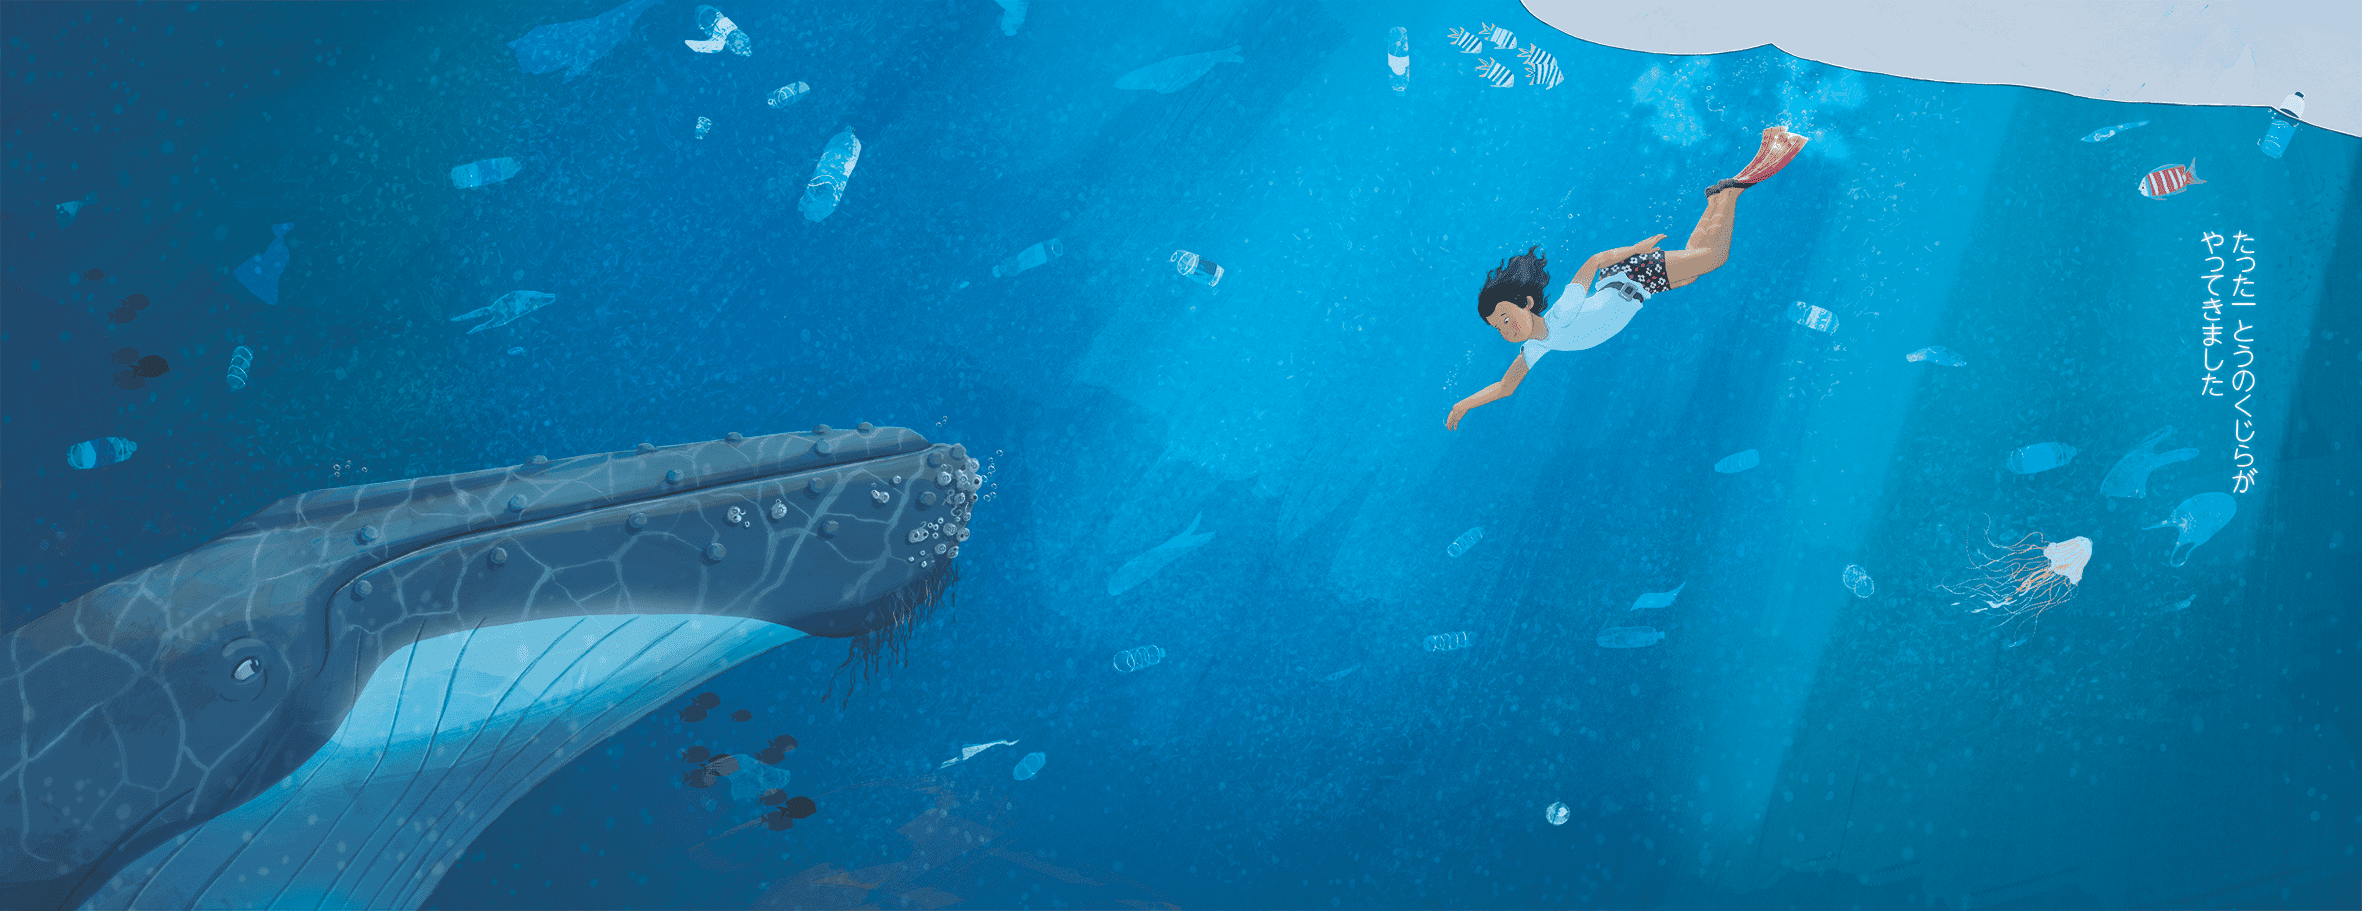 Illustration of Setsuko and the Whale taken from Setsuko and the Song of the Sea